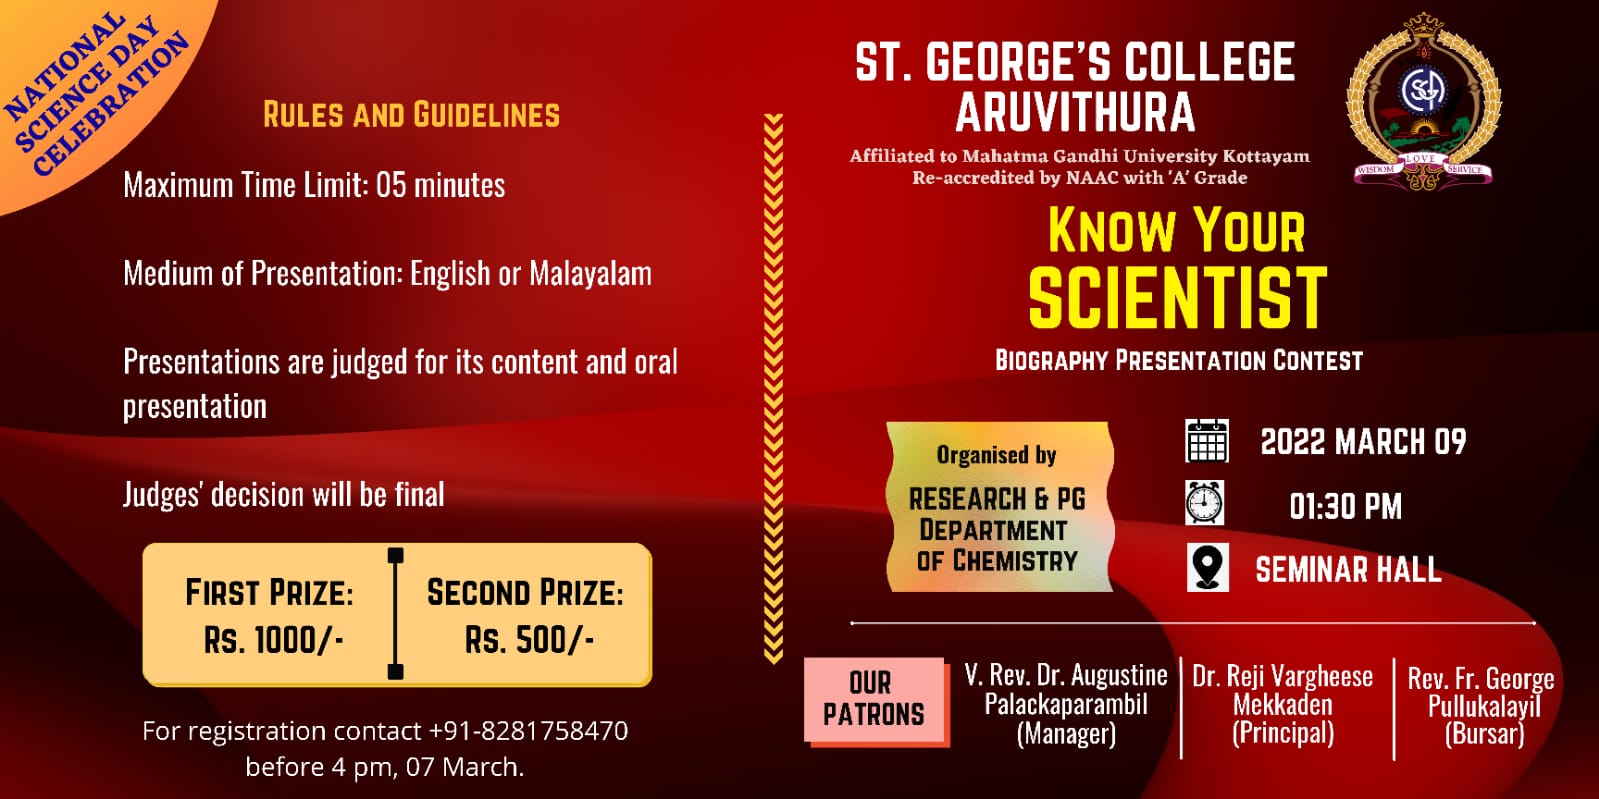 Know Your Scientist: Biography Presentation Contest